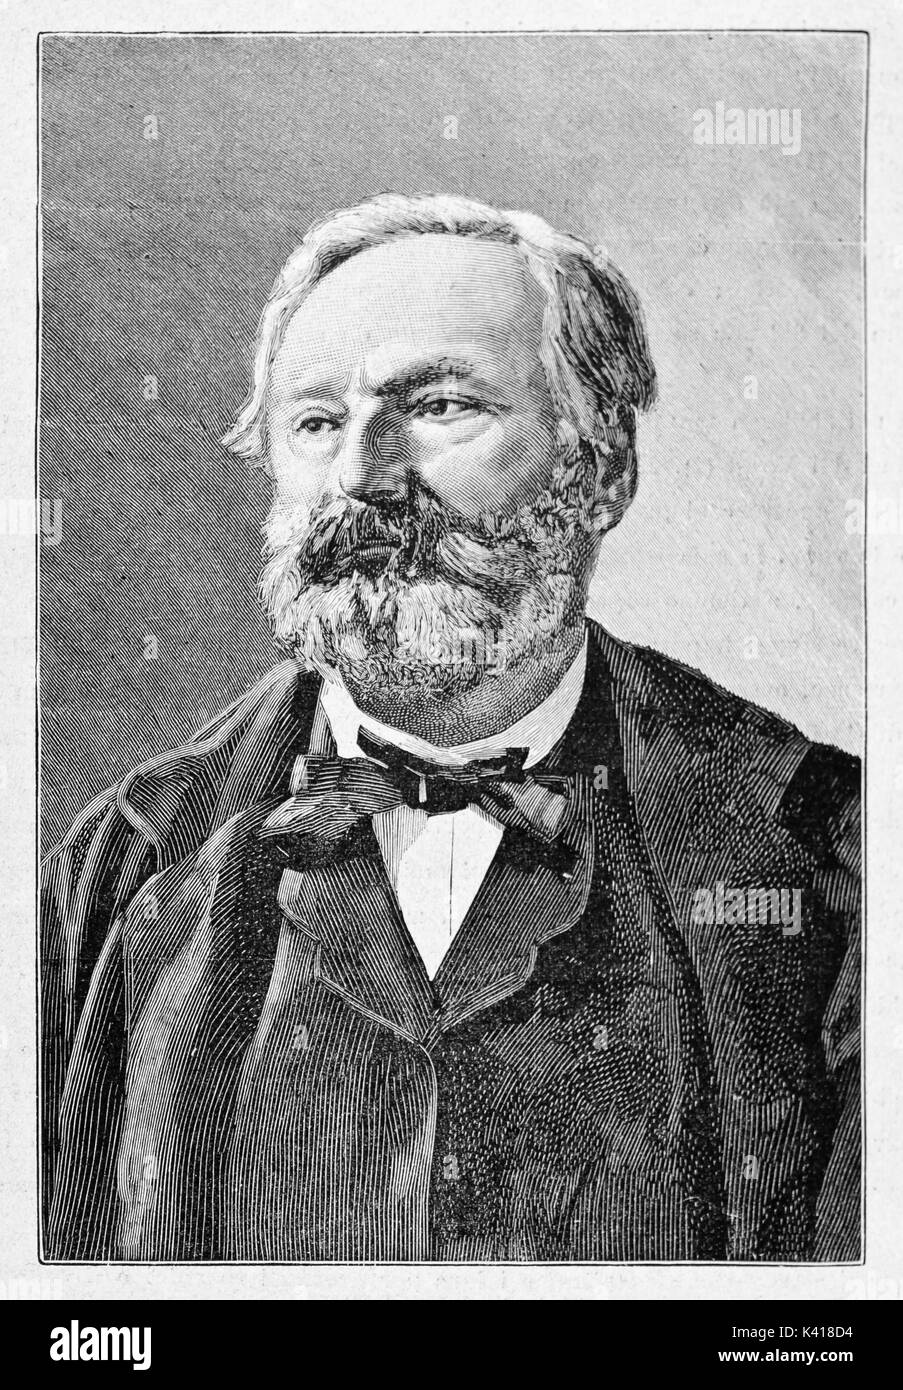 Old bust engraved portrait of Victor Hugo (1802 - 1885) in elegant ancient clothes. French poet dramatist and novelist. By E. Matania published on Garibaldi e i Suoi Tempi Milan Italy 1884 Stock Photo